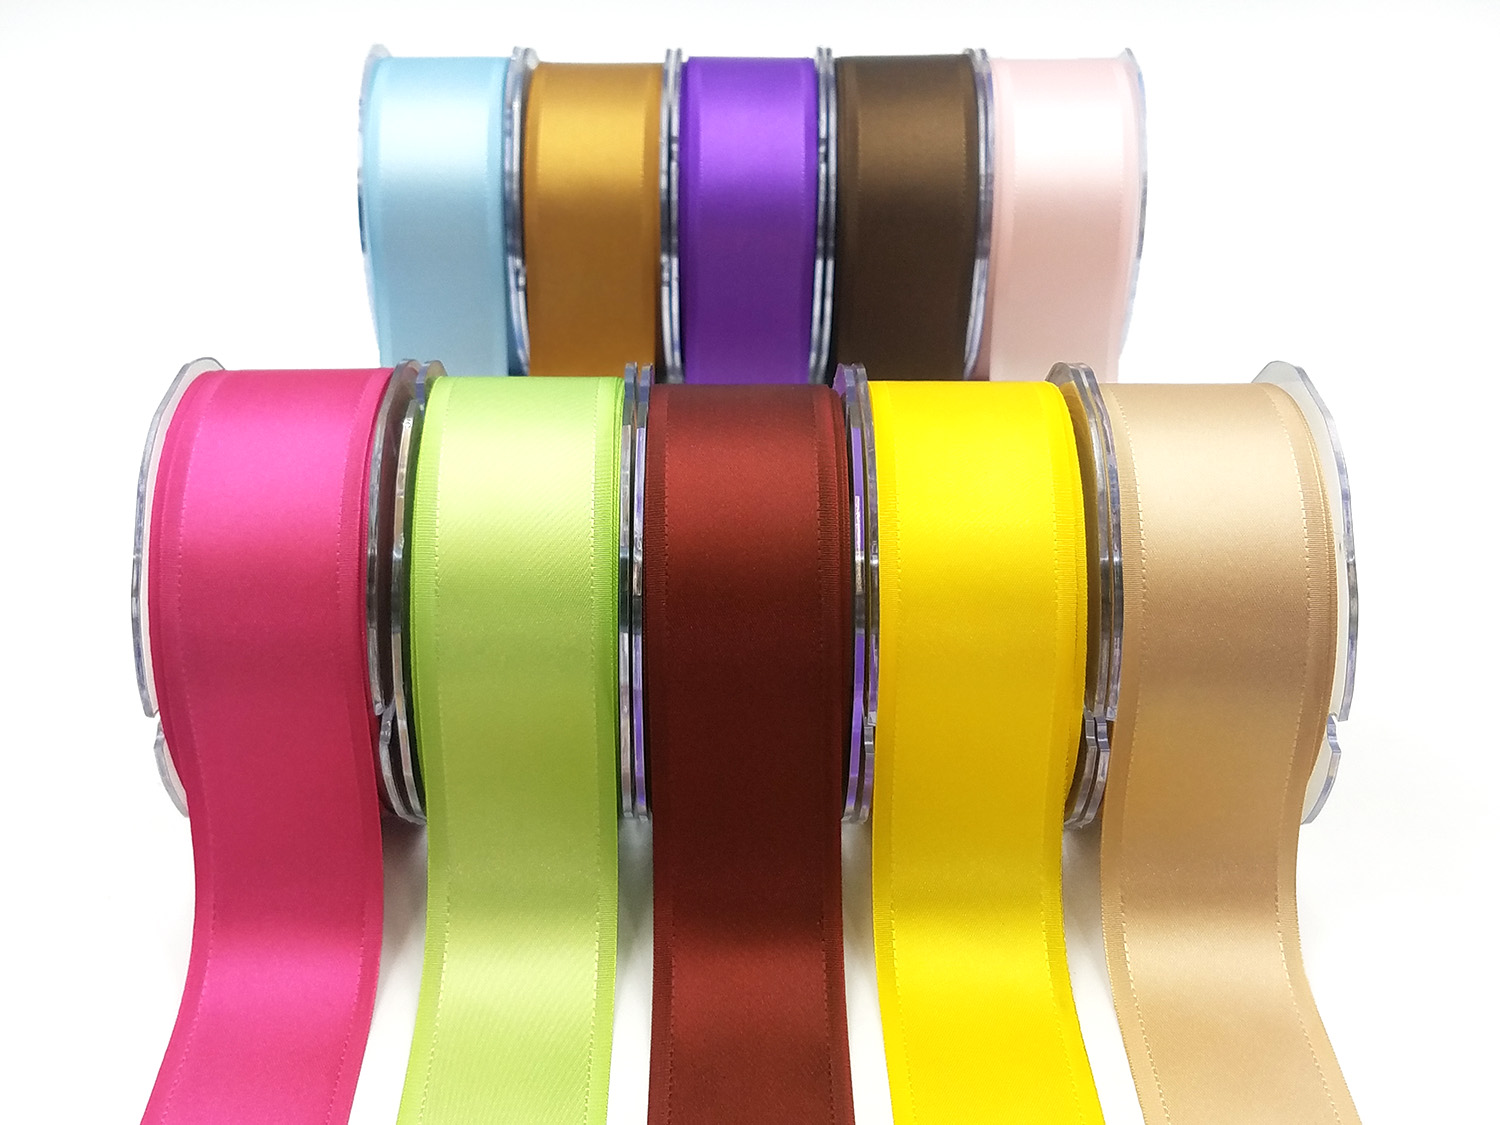 Shop Satin Ribbon 1.5 Edge with great discounts and prices online - Dec  2023